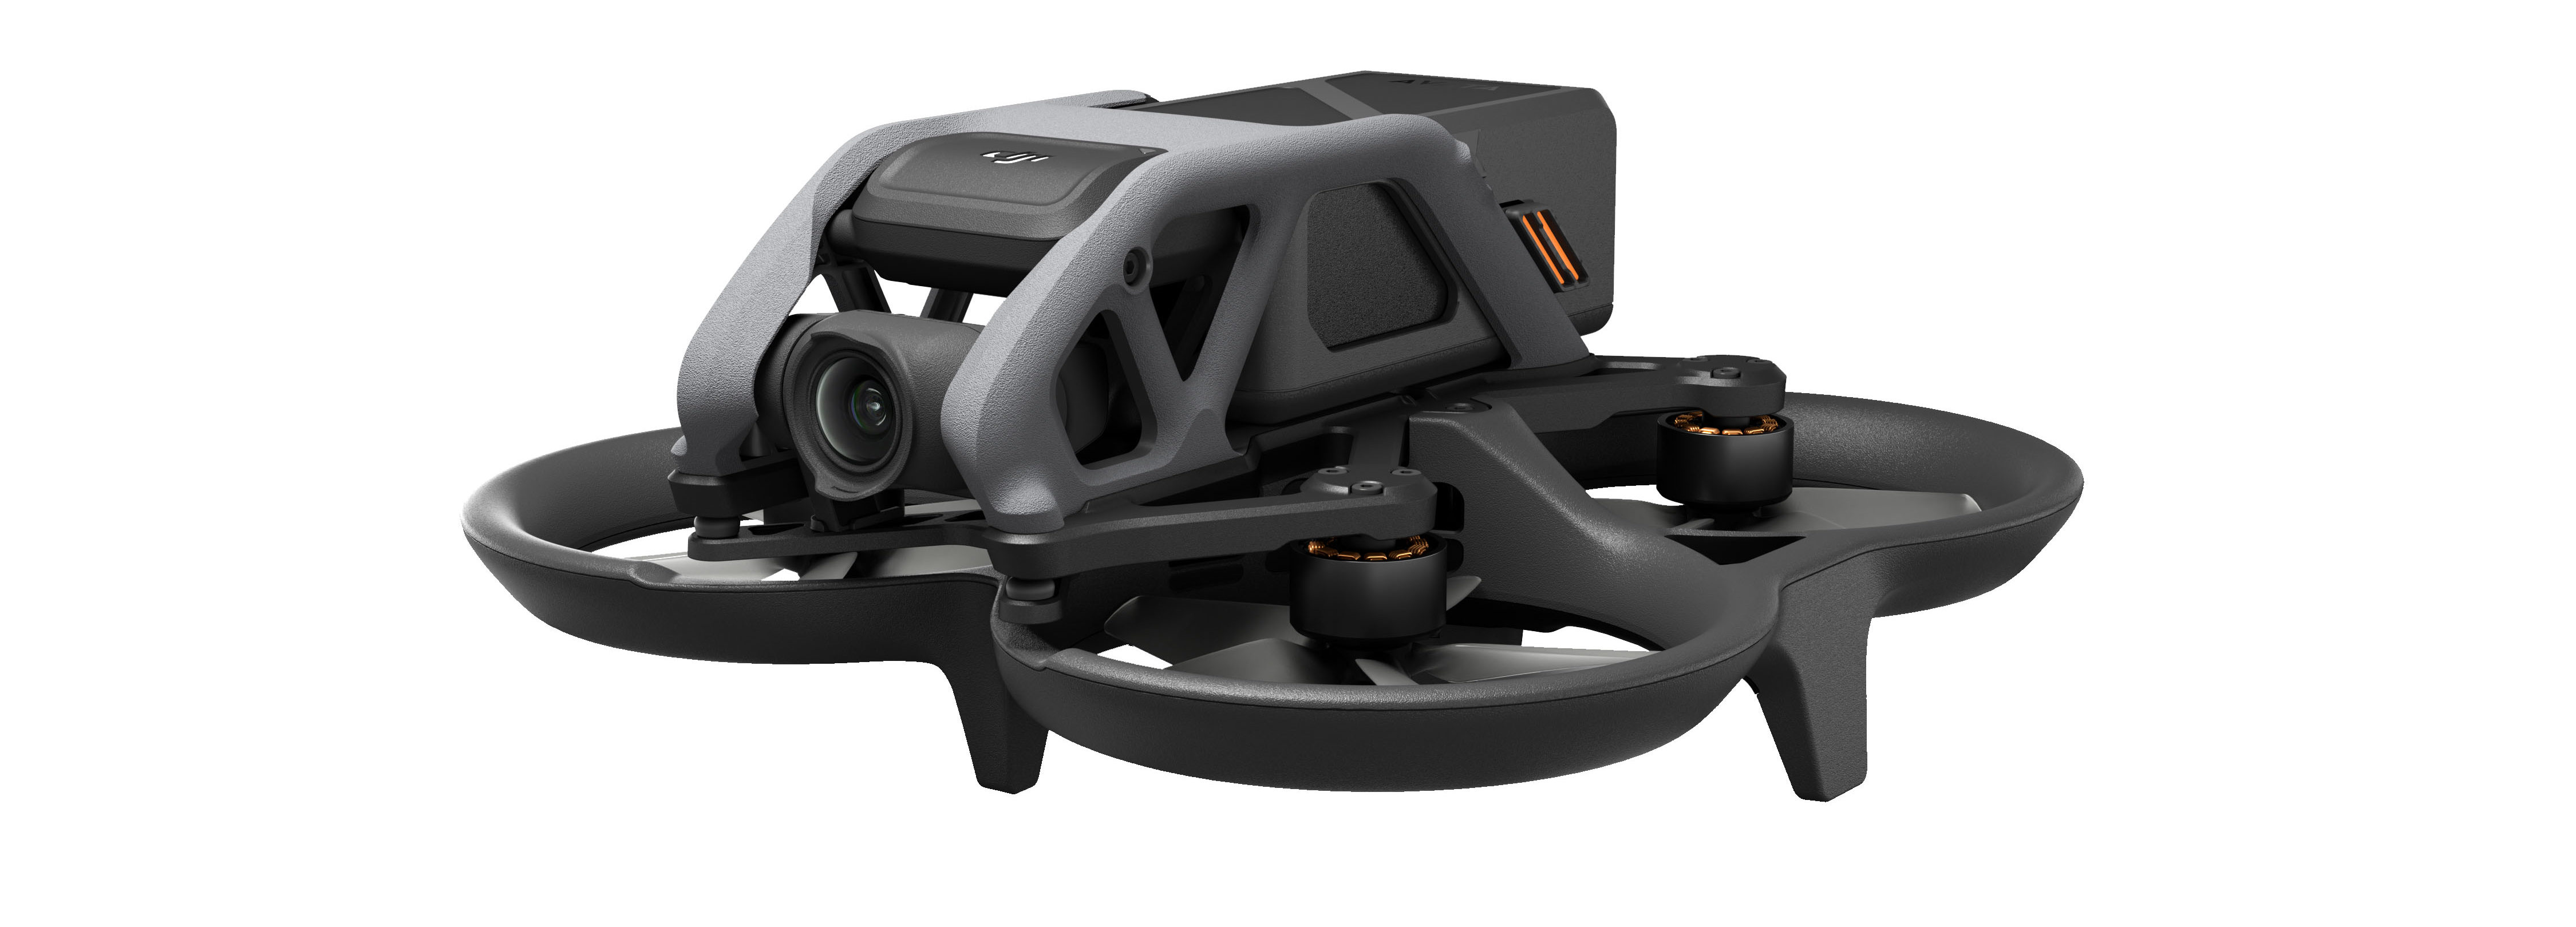 Introducing DJI Avata: An All-New FPV Drone Experience